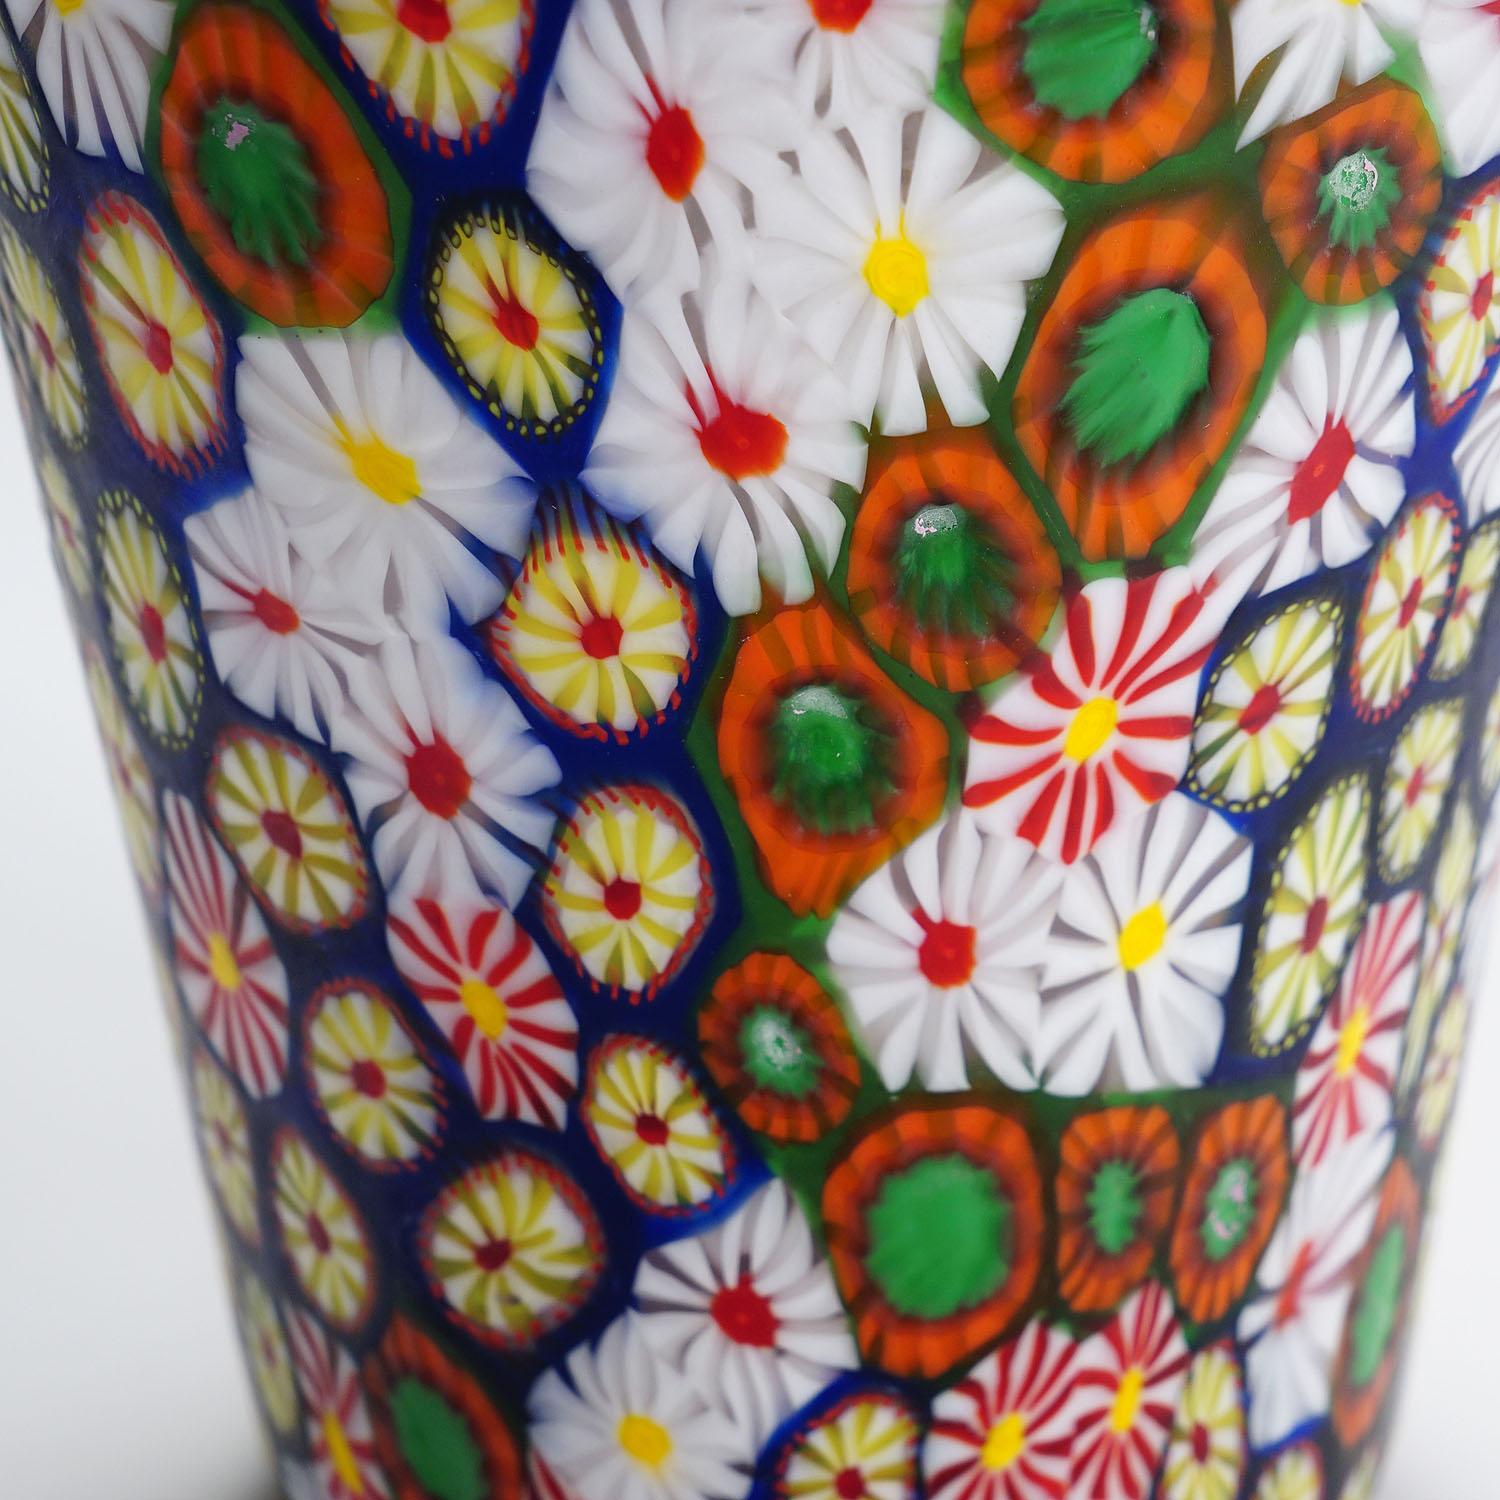 20th Century Vase with Redentore and Kiku Murrines Ermanno Toso for Fratelli Toso 1960s For Sale